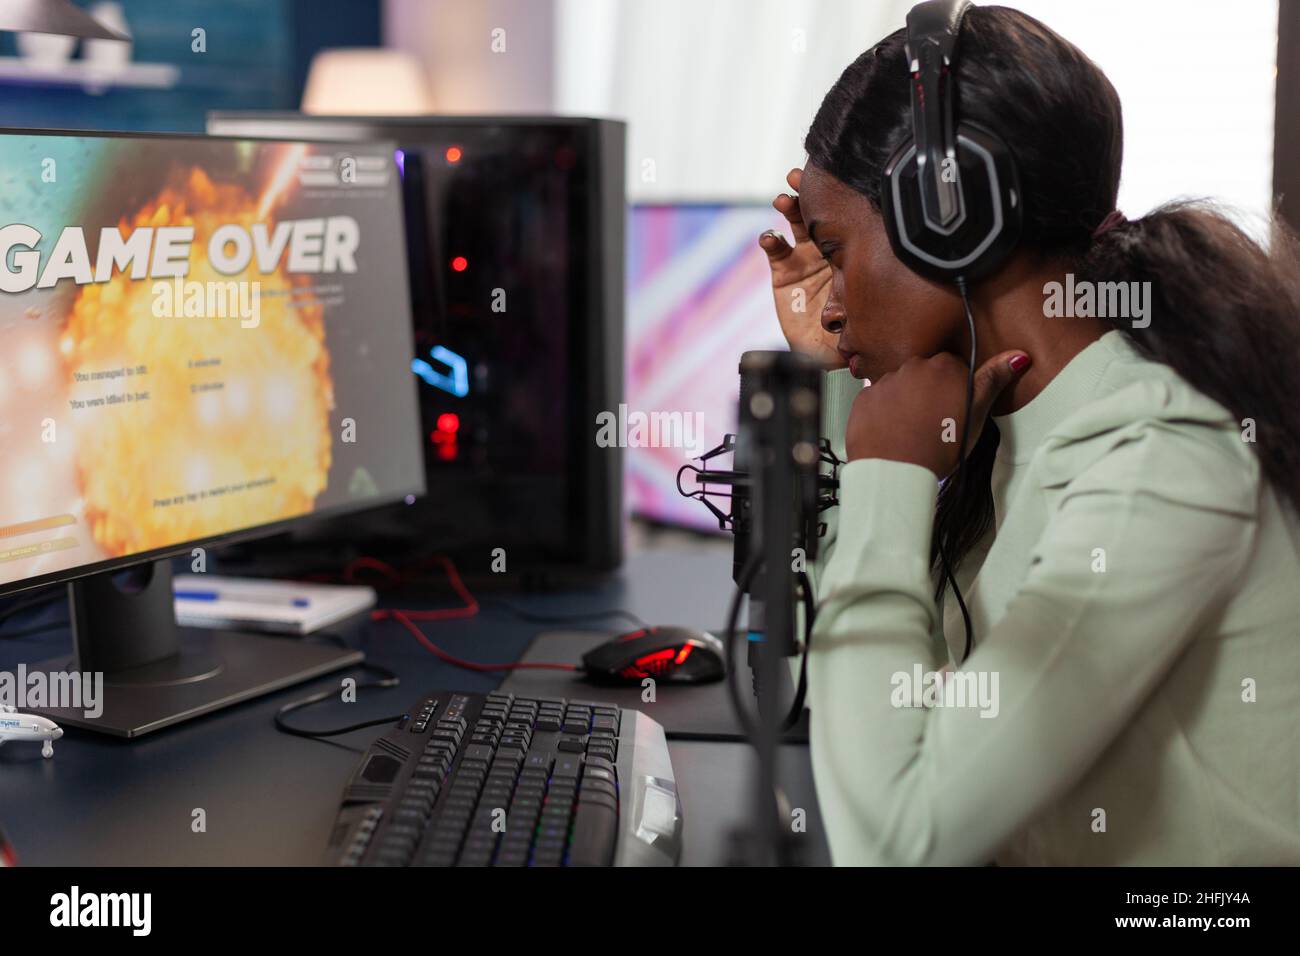 Sad upset woman gamer playing space shooter videogames losing online tournament while talking with players on streaming chat. Nervous streamer using RGB gaming computer. Game over on screen Stock Photo